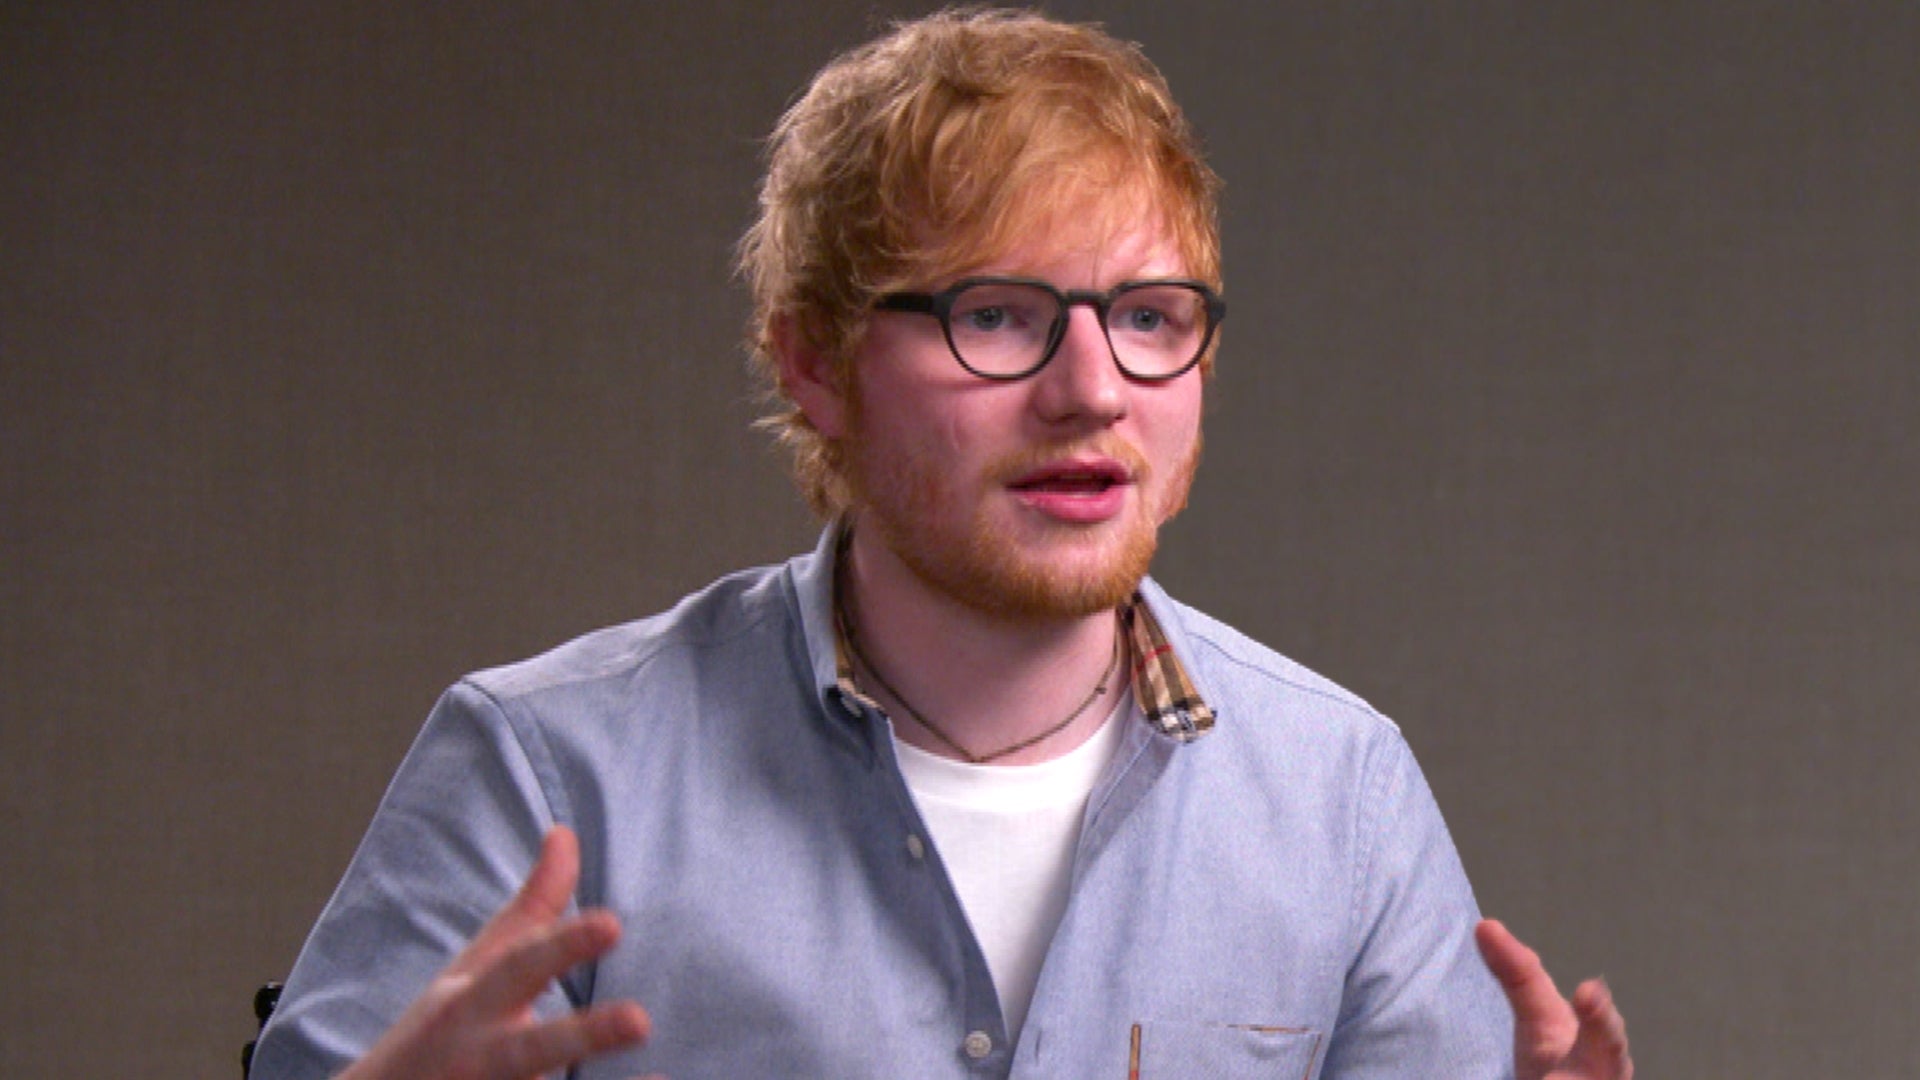 Ed Sheeran Channels His ‘Deepest, Darkest Thoughts’ on New Album ‘Subtract’